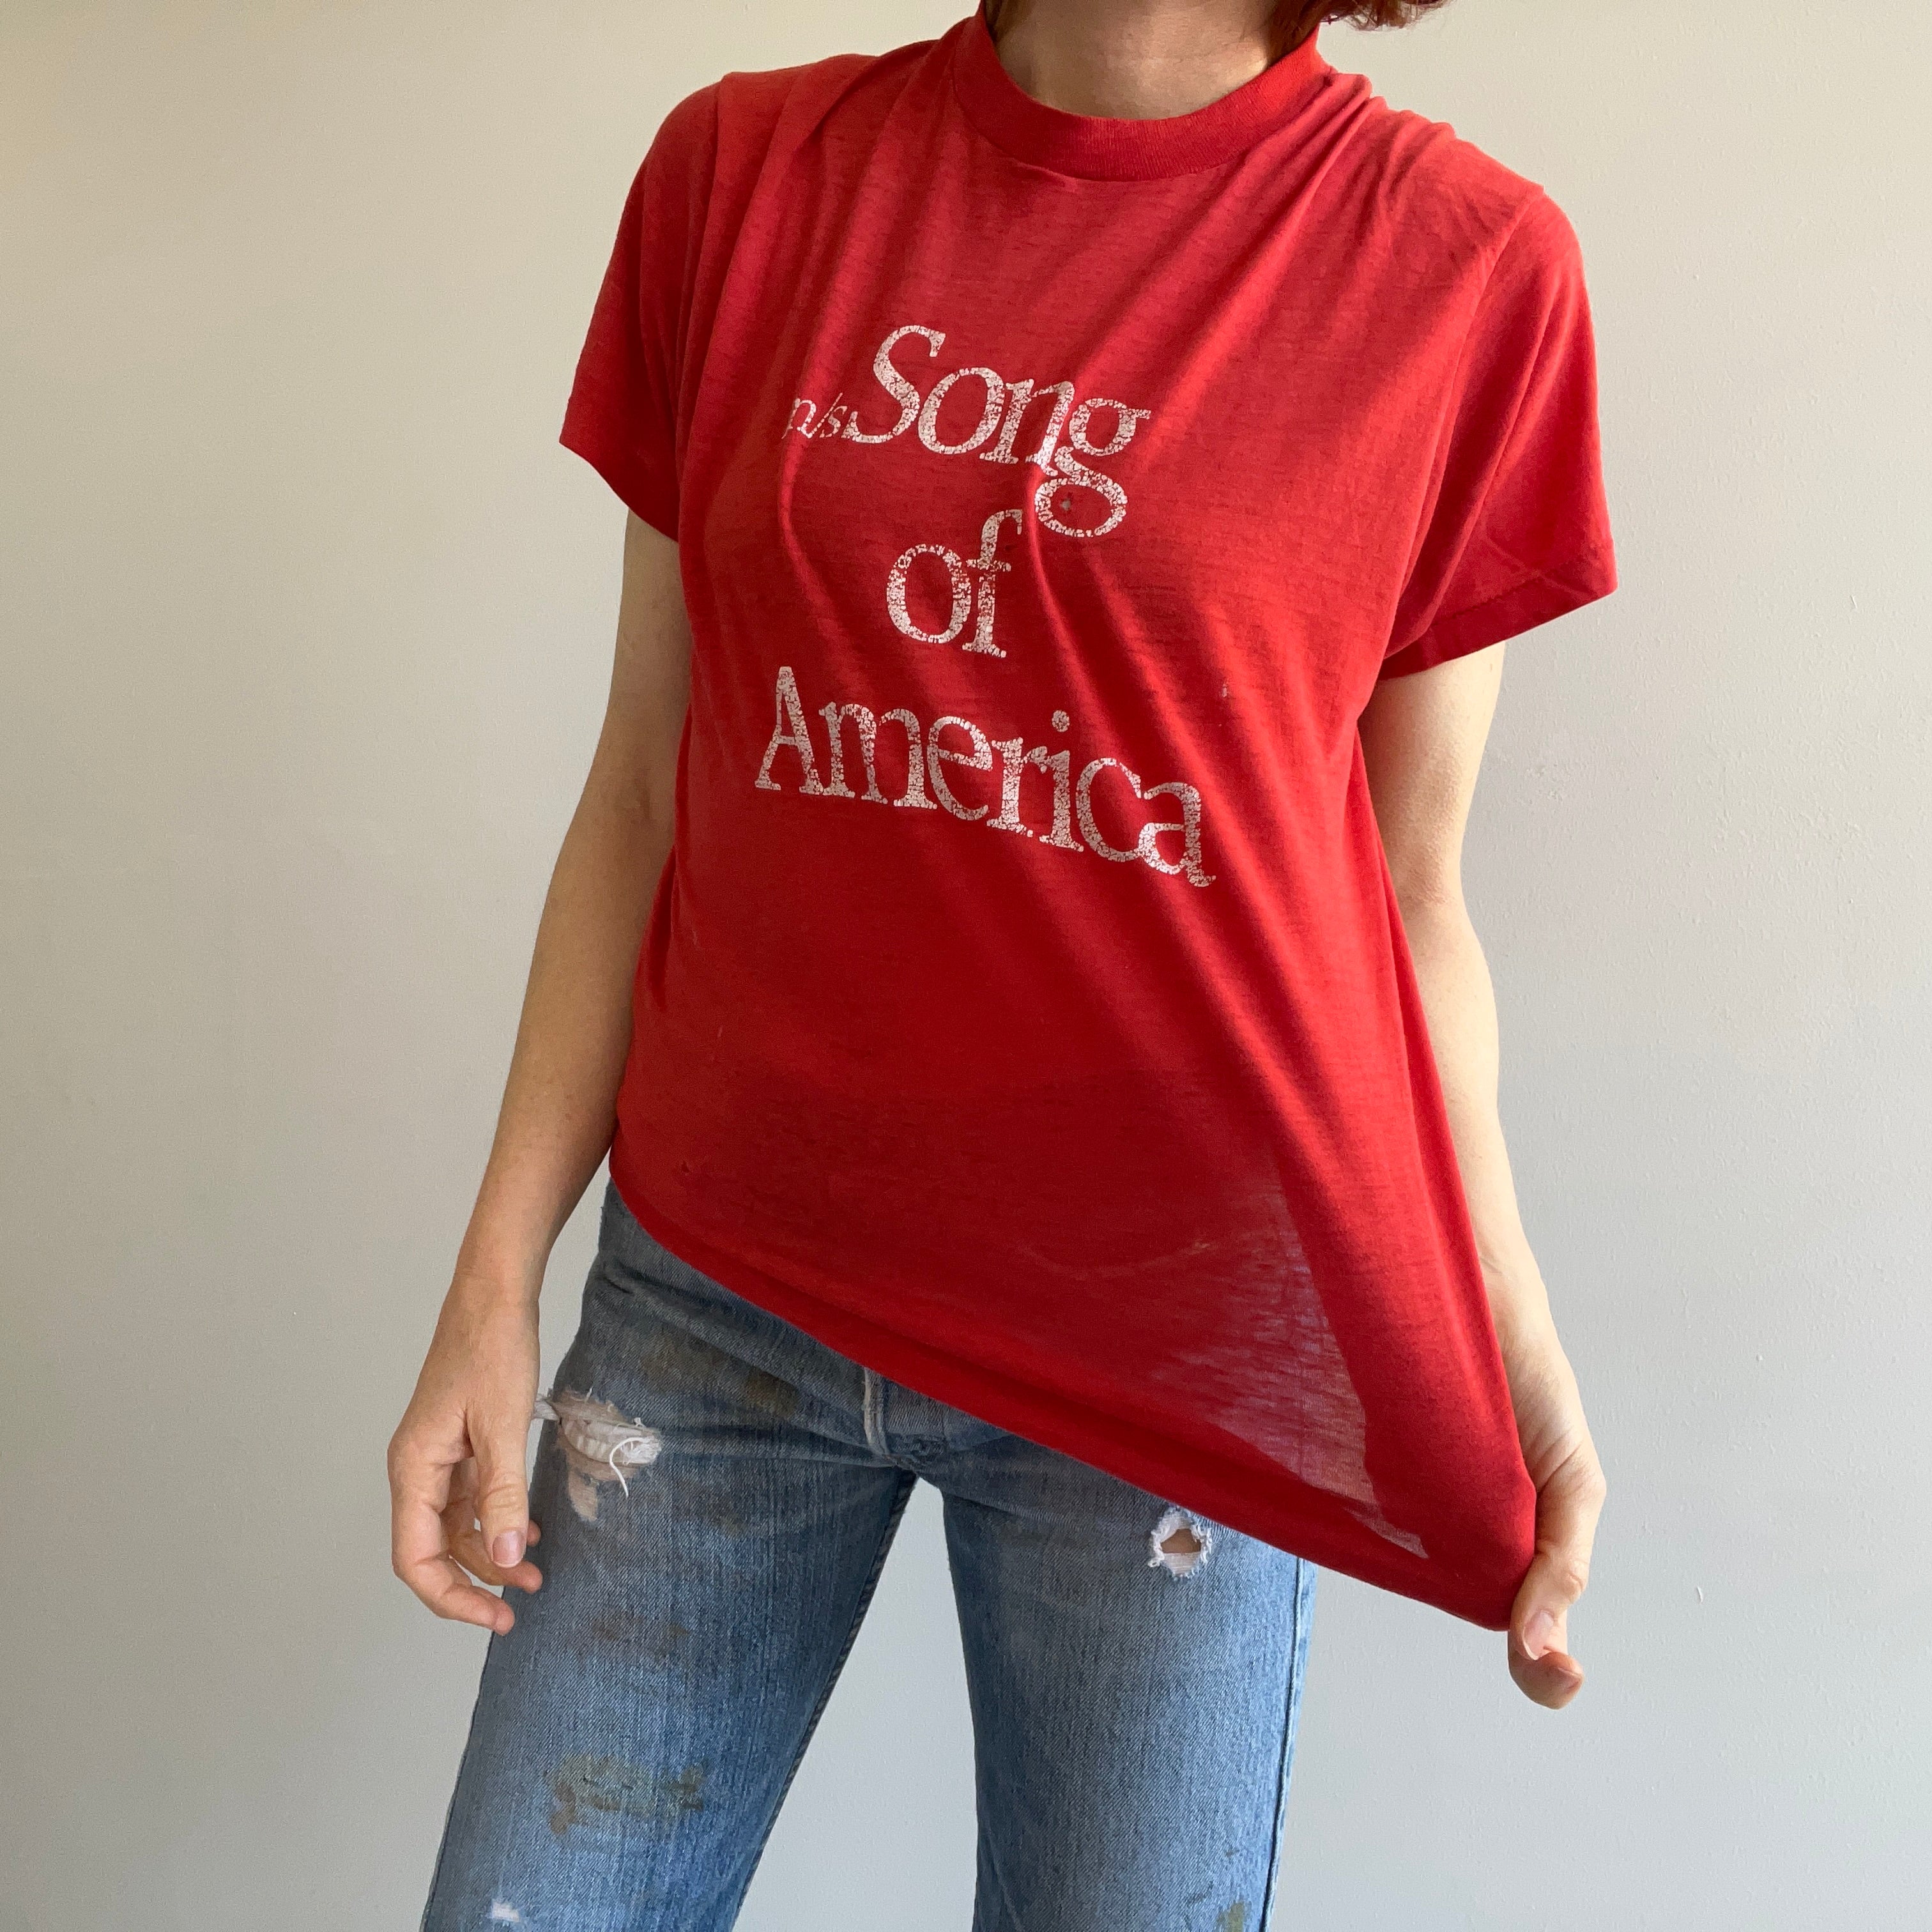 1970/80s Song of America Silky Soft and Thin T-Shirt